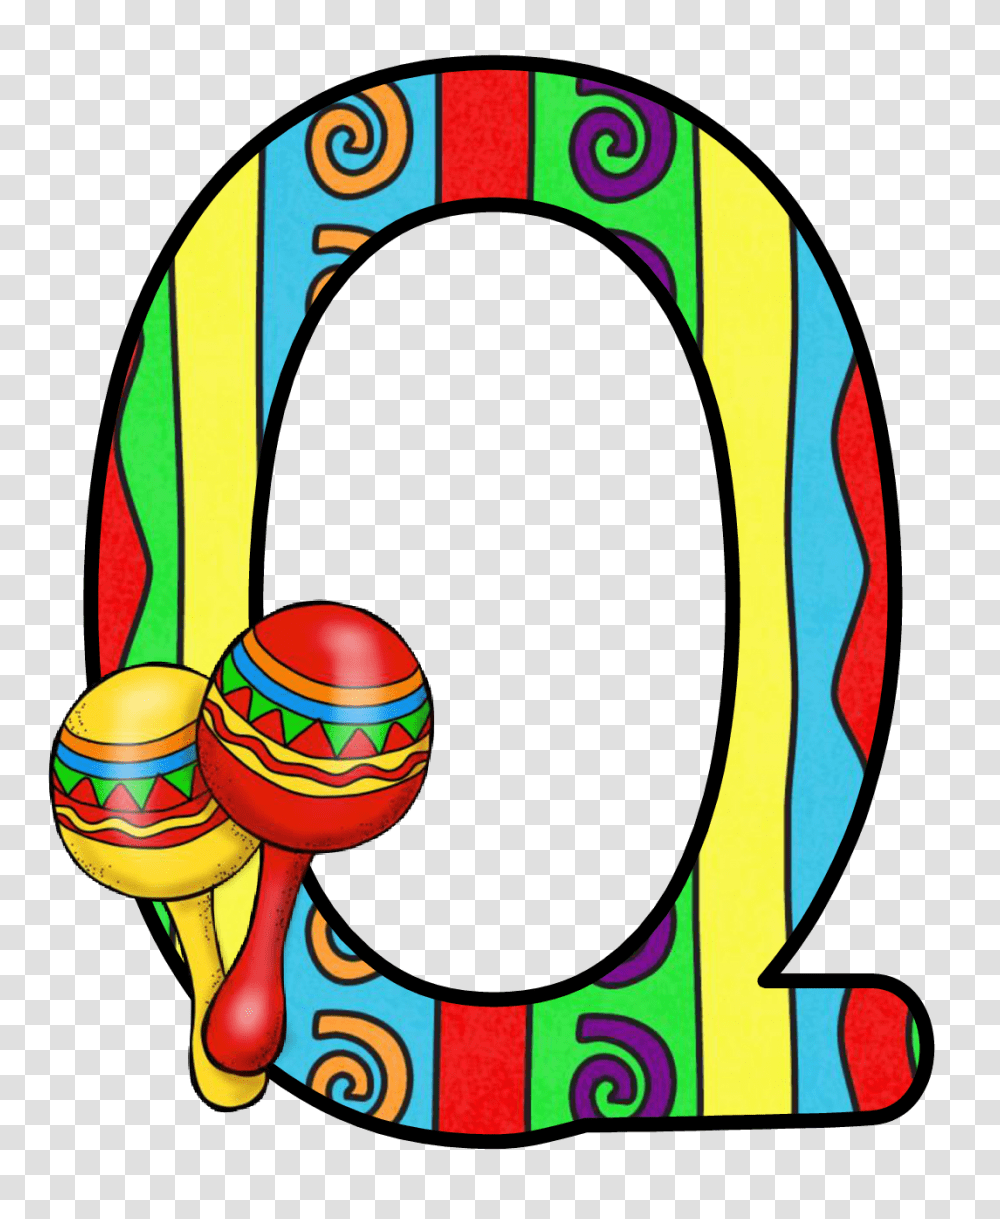 Ch B Alfabeto May Th De Kid Sparkz Abc Hola Adios, Food, Egg, Number Transparent Png